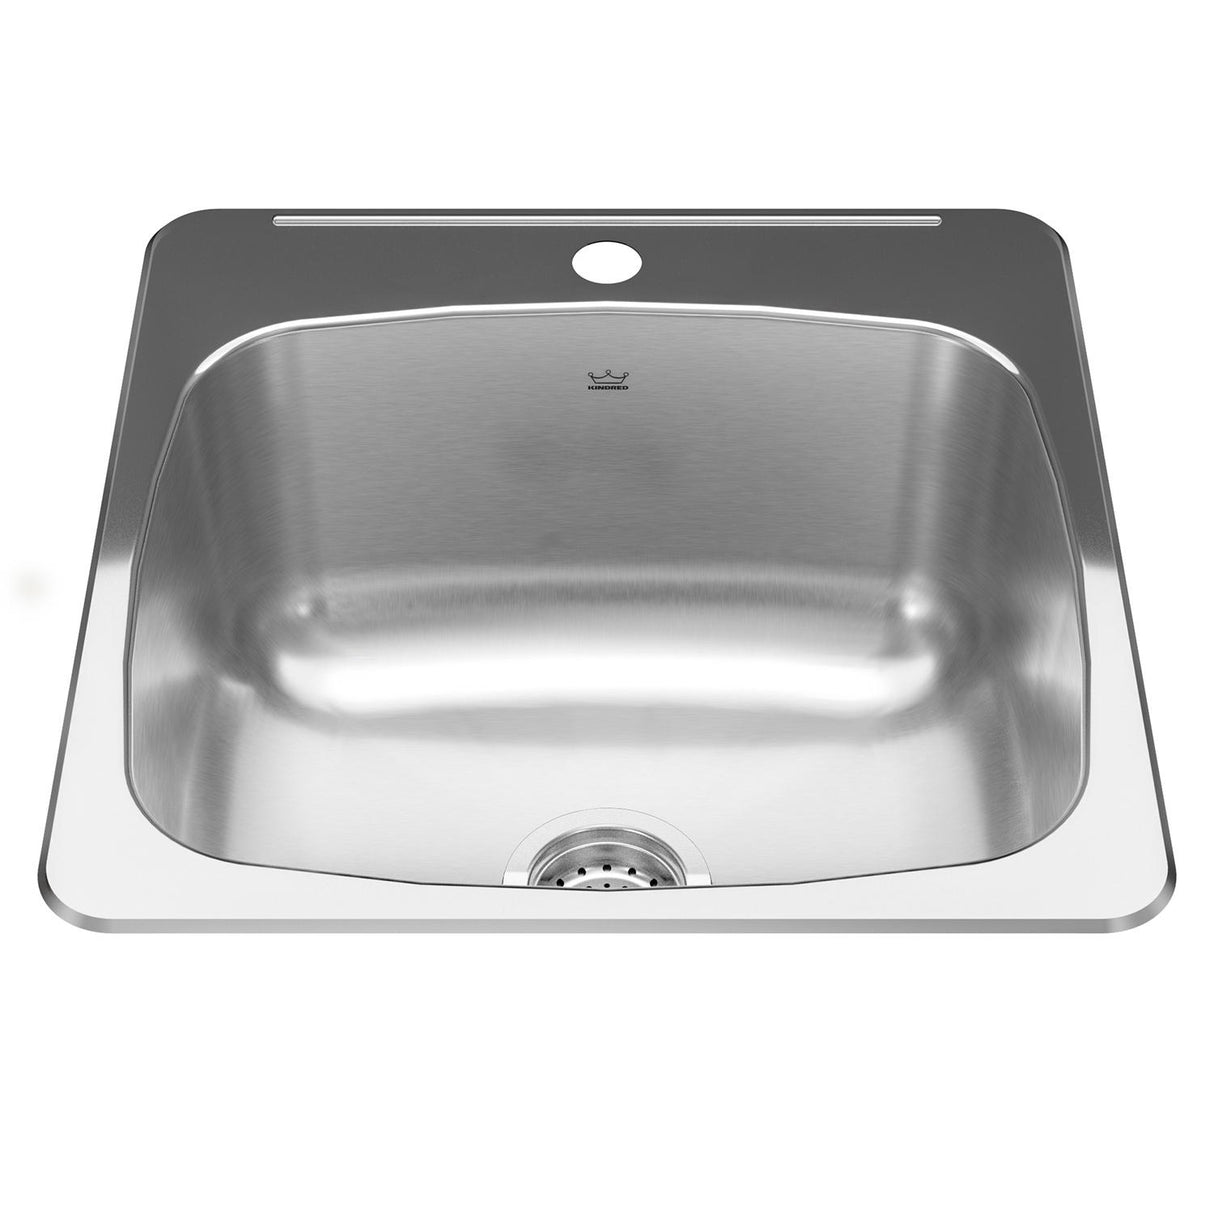 KINDRED RSL2020-10-1N Steel Queen 20.13-in LR x 20.56-in FB x 10-in DP Drop In Single Bowl 1-Hole Stainless Steel Laundry Sink In Linear Brushed Bowl with Mirror Finished Rim